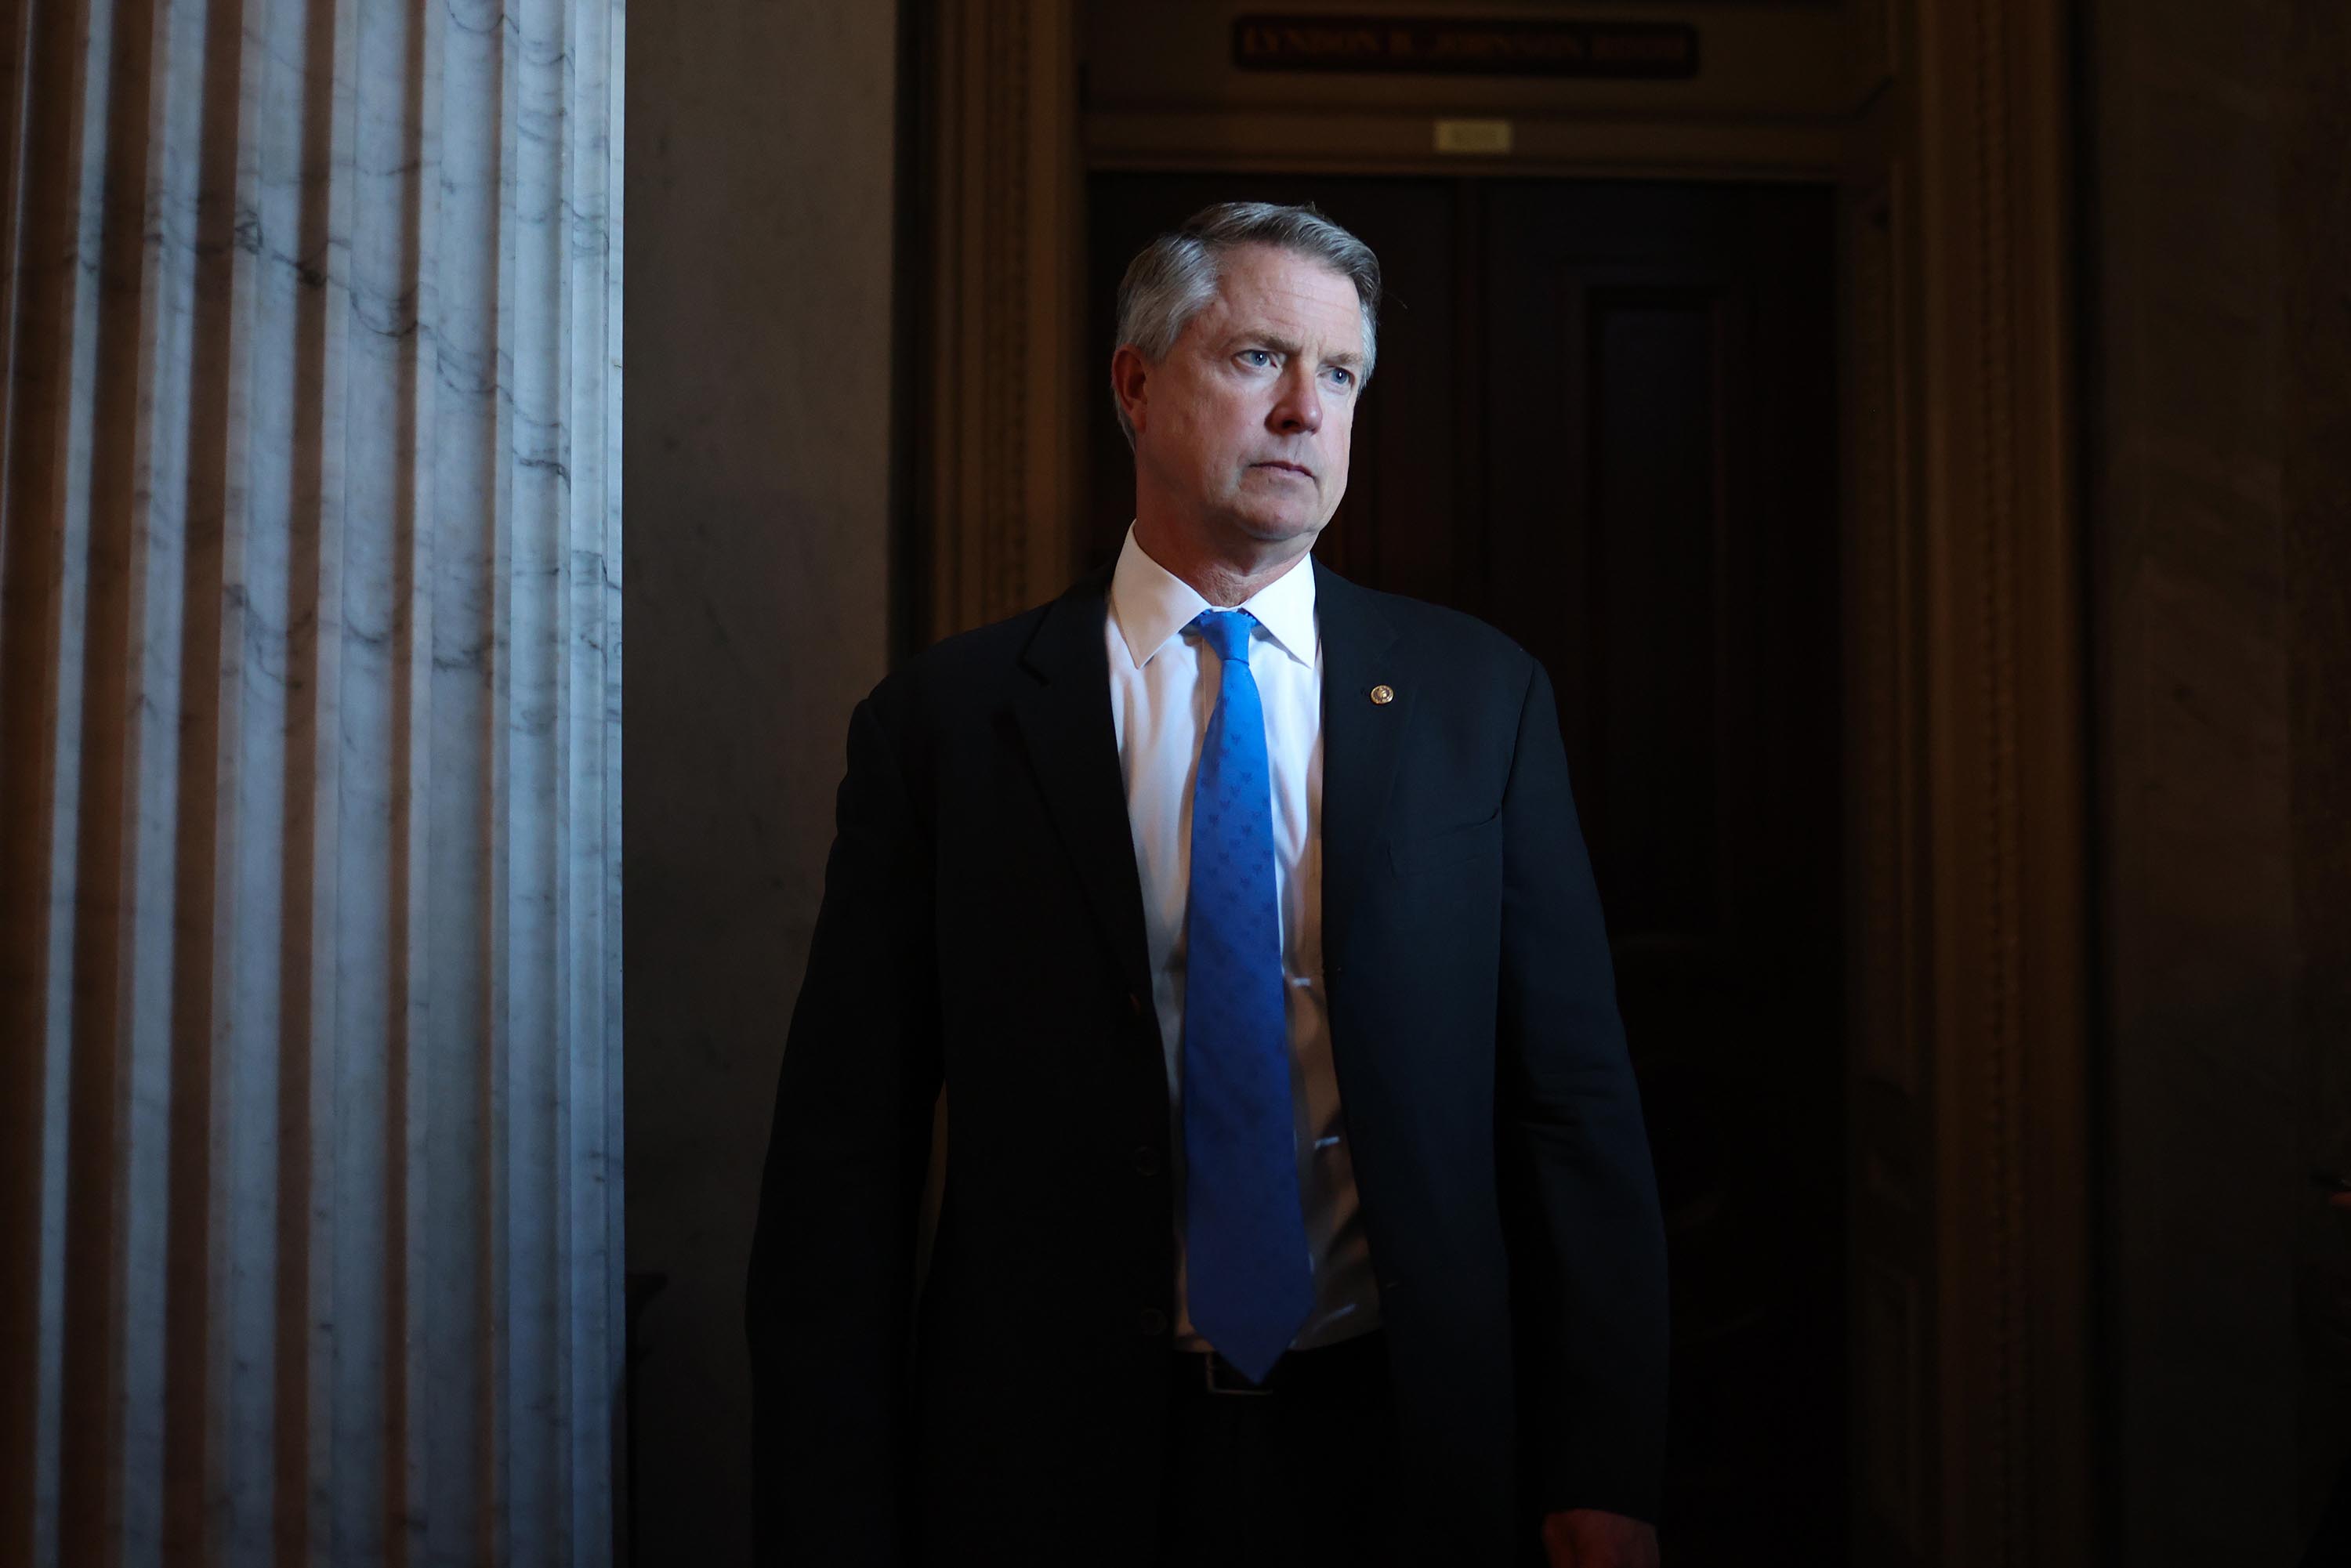  Sen. Roger Marshall (R-KS) departs from a luncheon with Senate Republicans in the U.S. Capitol building on August 5, 2021. 